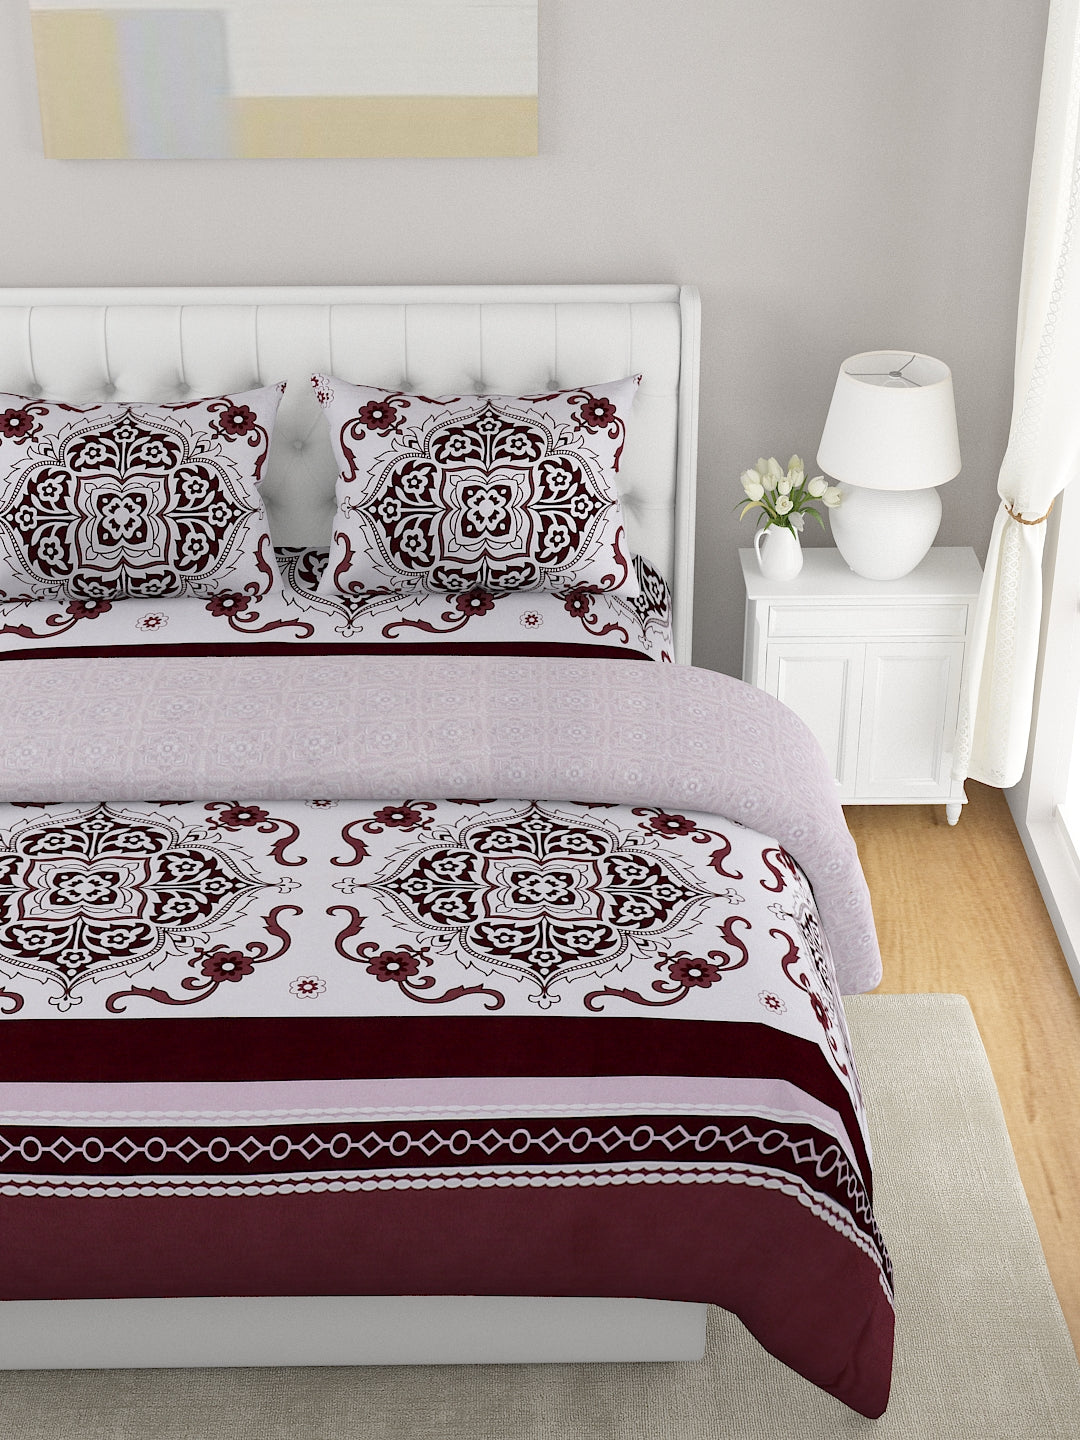 White & Brown 4 Pcs Ethnic Motifs Printed Double Queen Bedding Set